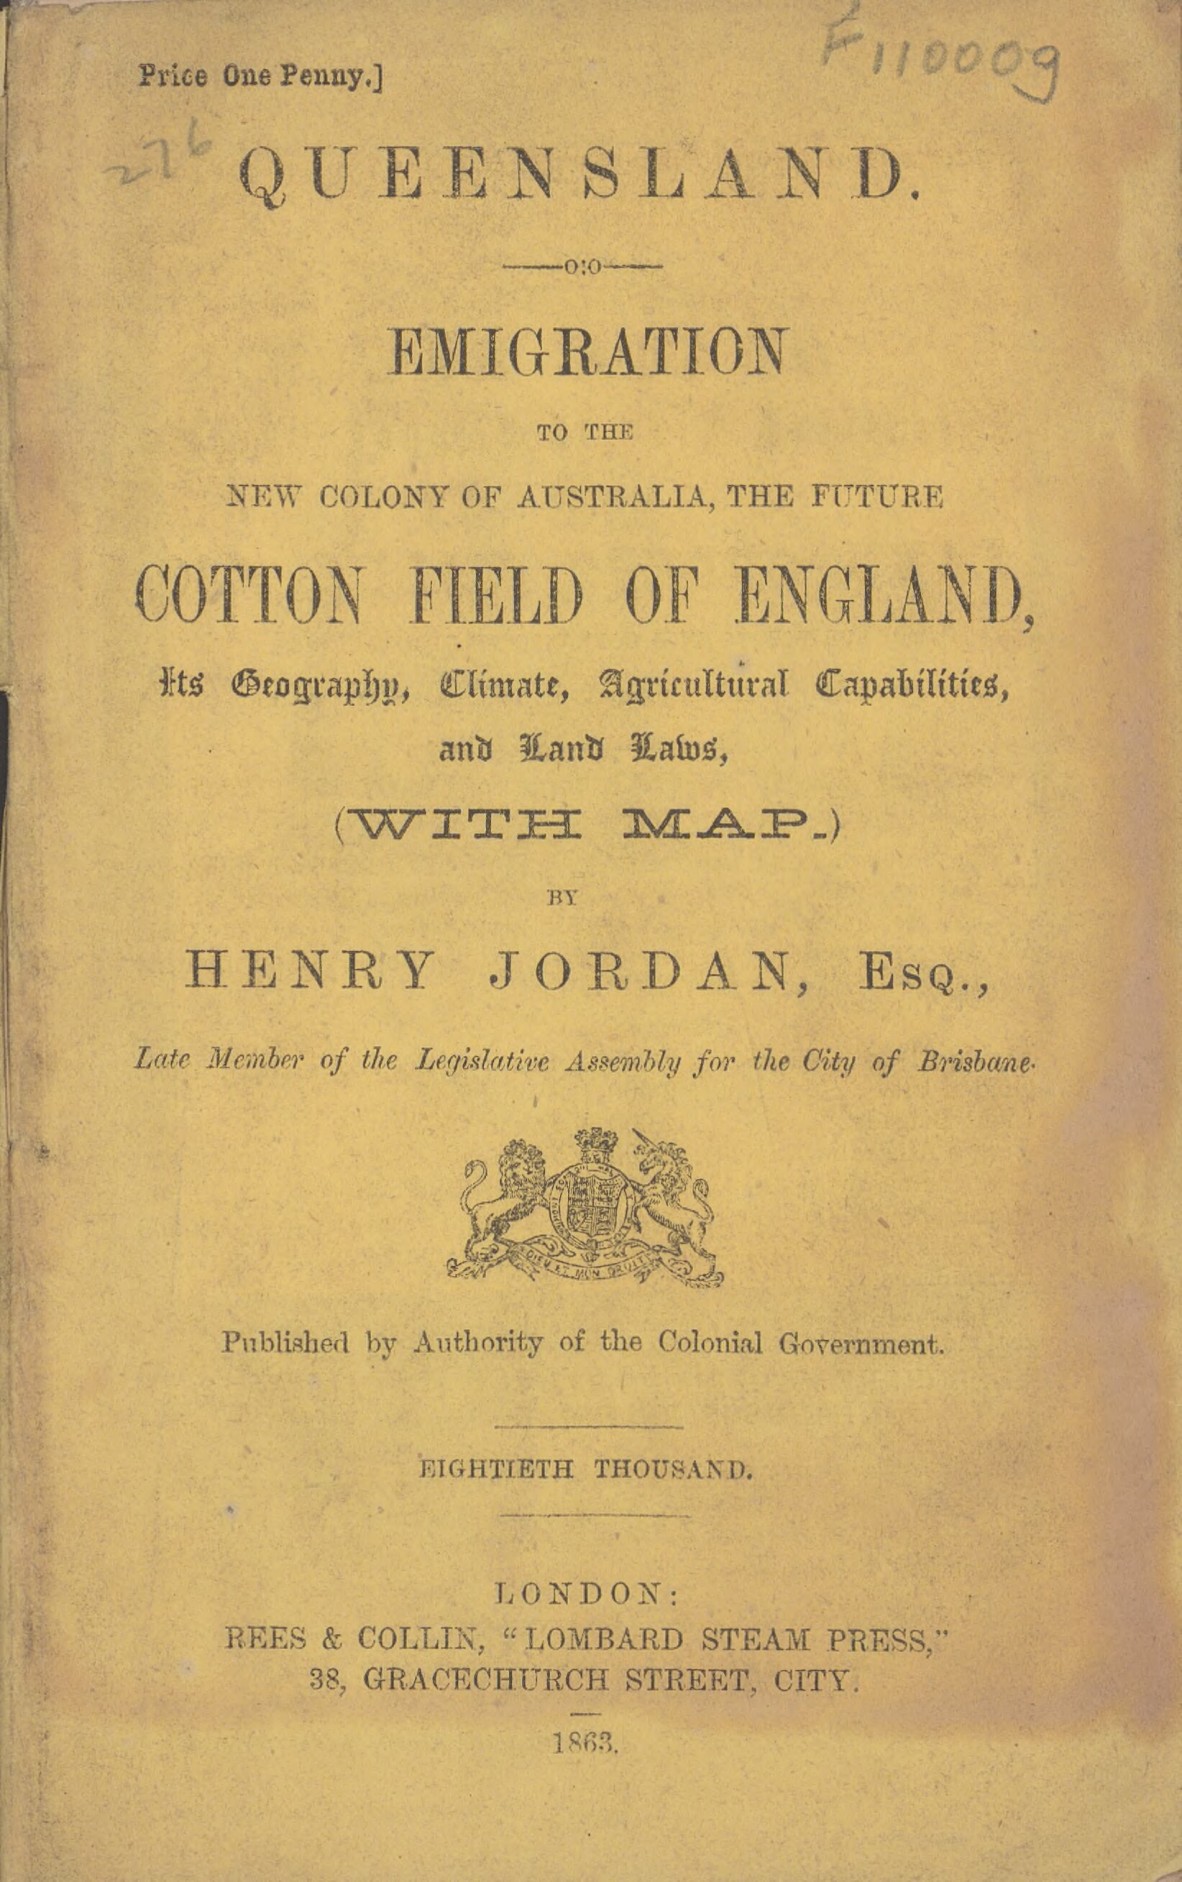 Queensland: emigration to the new colony of Australia, the future cotton field of England